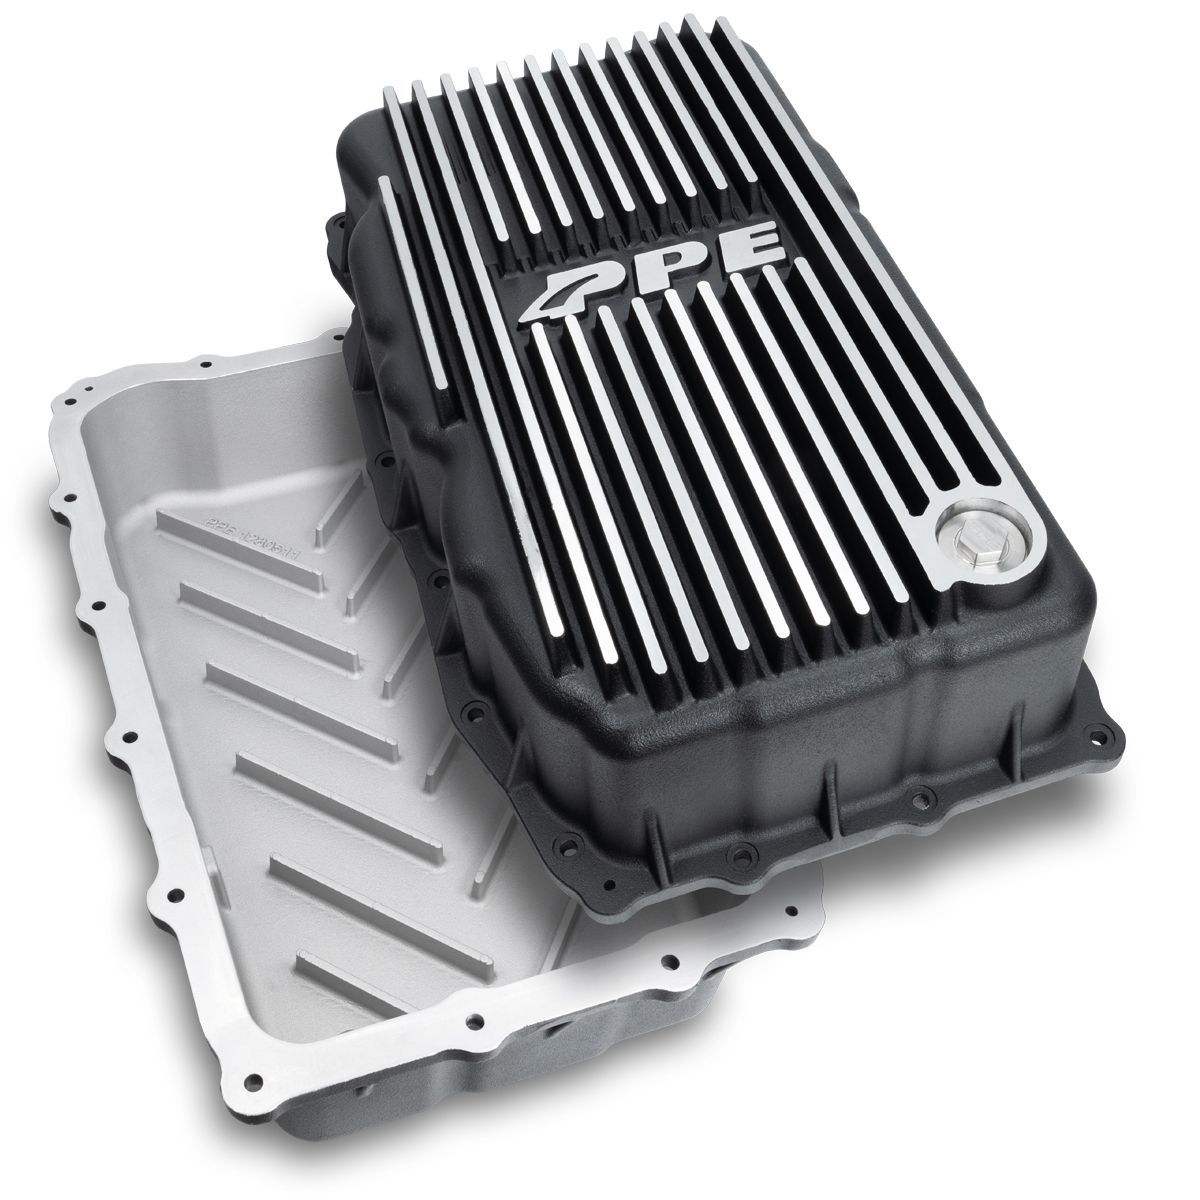 PPE - PPE Brushed Aluminum Deep Transmission Pan For 19+ Chevy GMC 3.0L Duramax 10L80